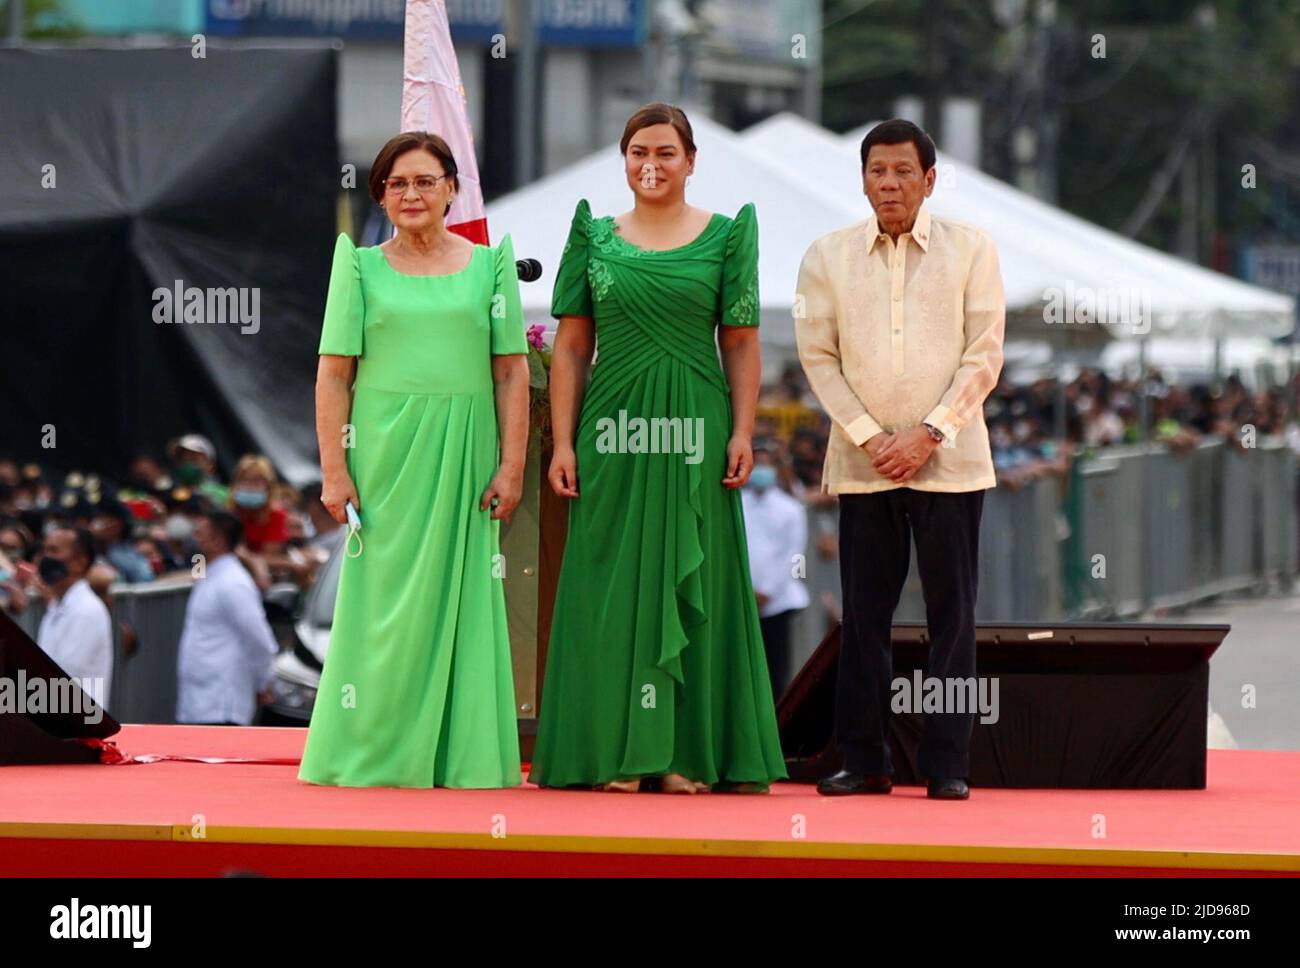 (220619) -- DAVAO CITY, June 19, 2022 (Xinhua) -- Sara Duterte-Carpio (C) poses for photos with her father President Rodrigo Duterte and her mother Elizabeth after taking her oath of office as the 15th vice president of the Philippines in Davao City in the southern Philippines, June 19, 2022. A lawyer and former mayor of Davao City, Duterte-Carpio will officially assume office on June 30. Her six-year term ends on June 30, 2028. Duterte-Carpio won by garnering 32.2 million votes, the highest number of votes from all national candidates, in the May 2022 elections and about twice the 16. Stock Photo